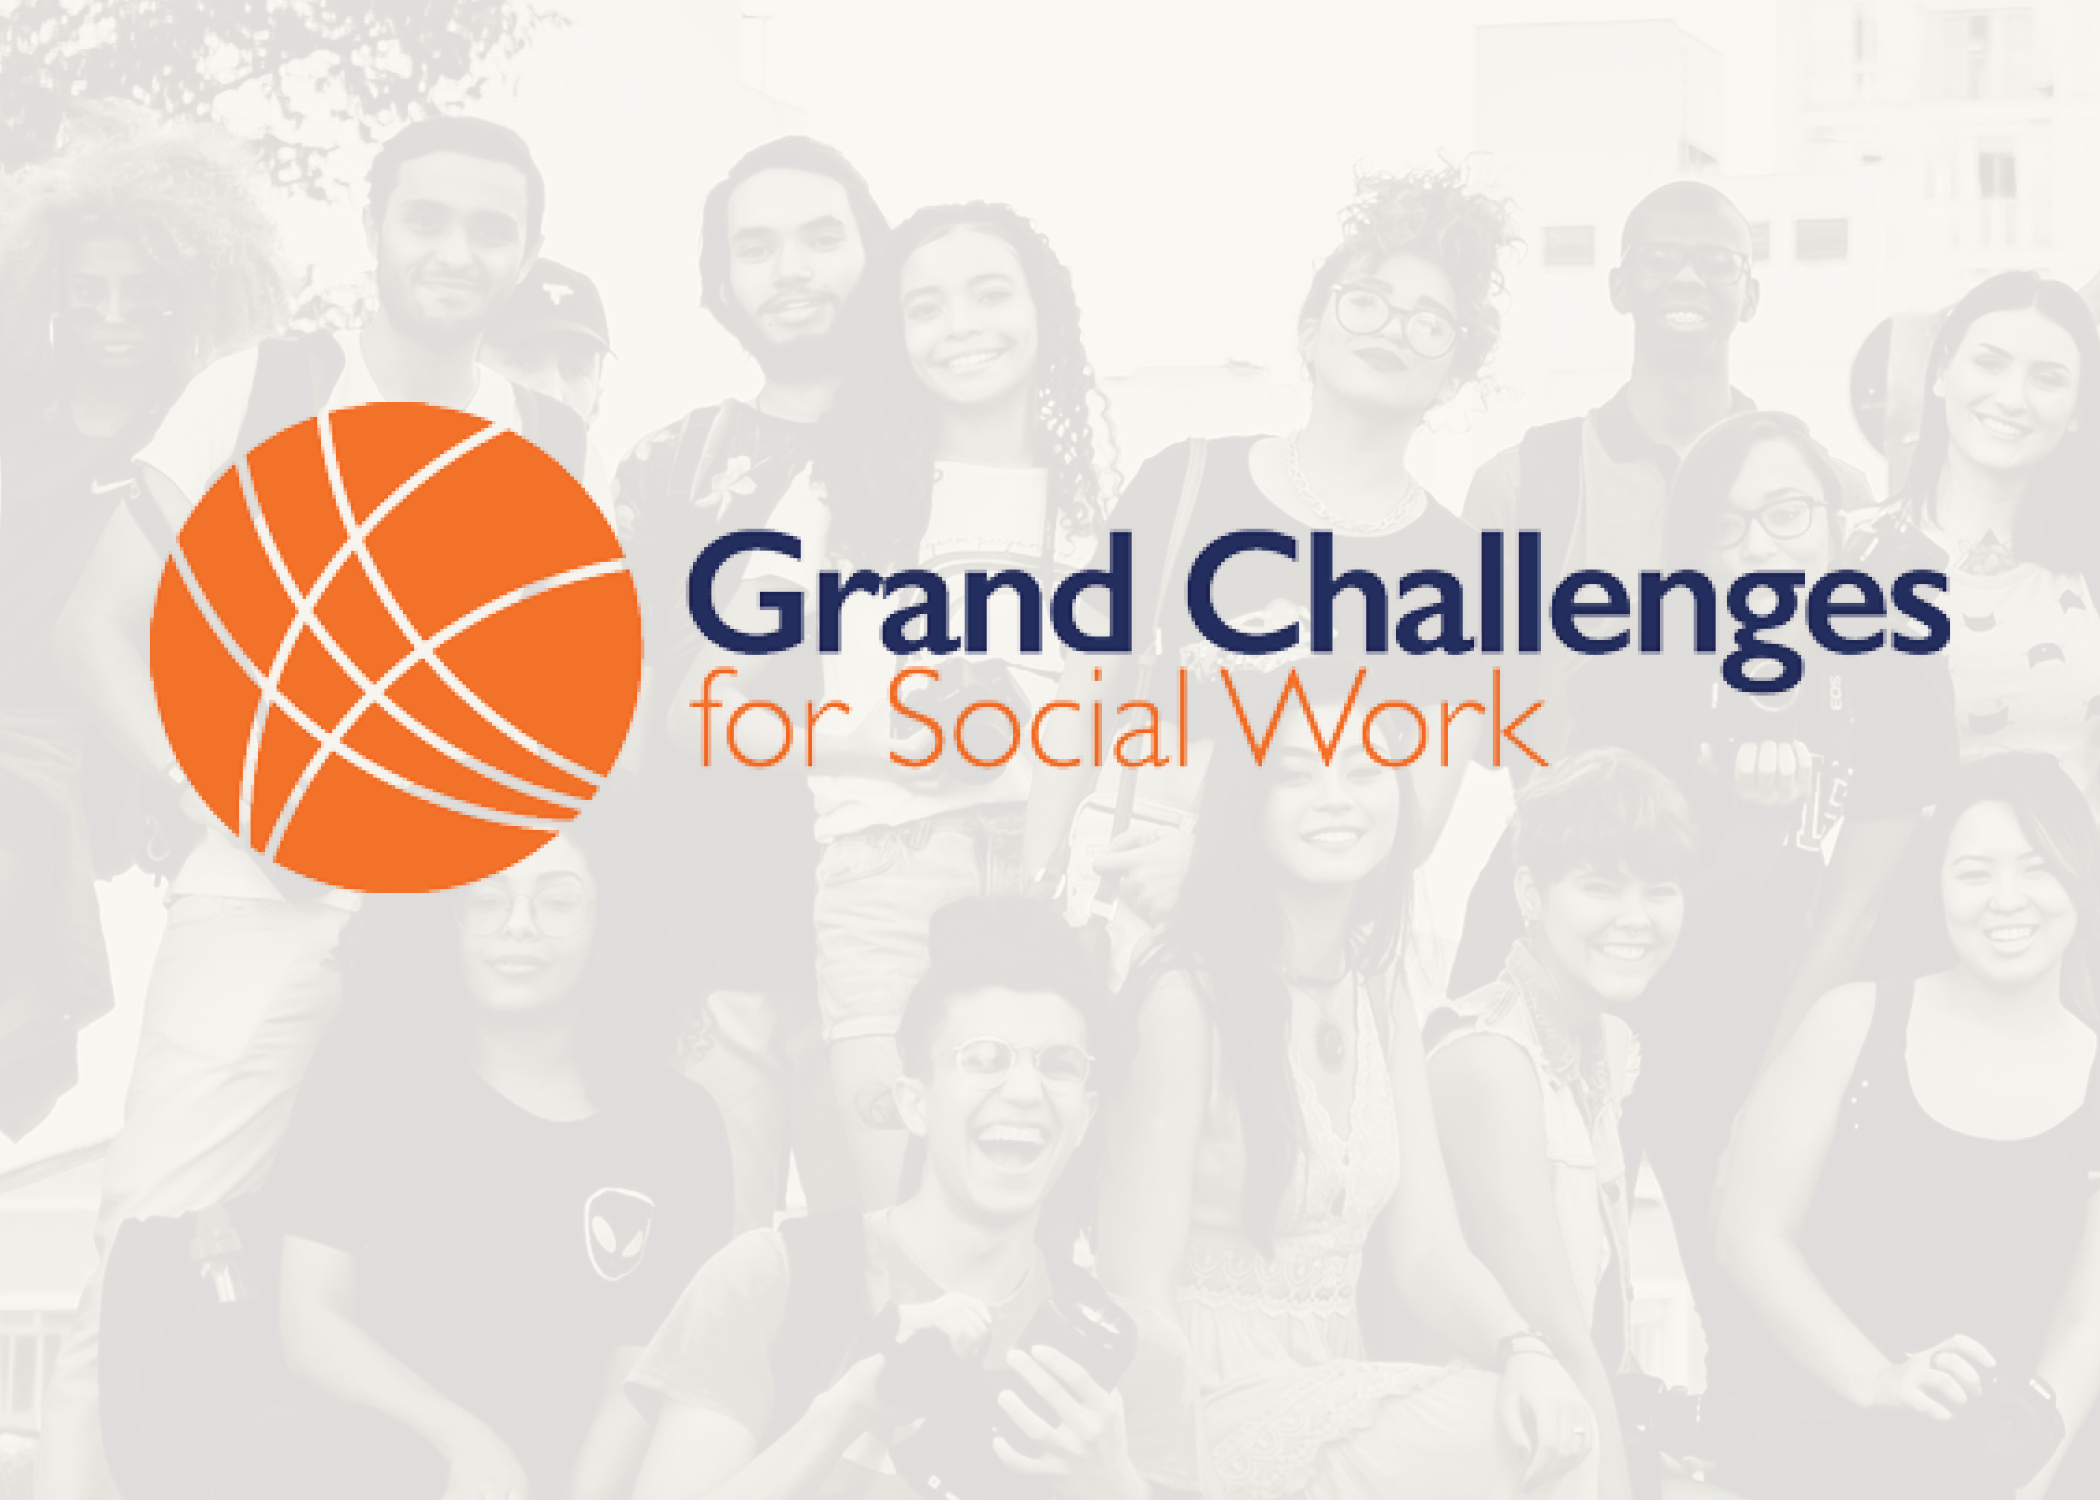 The Grand Challenges for Social Work logo on top of a faint image of smiling people